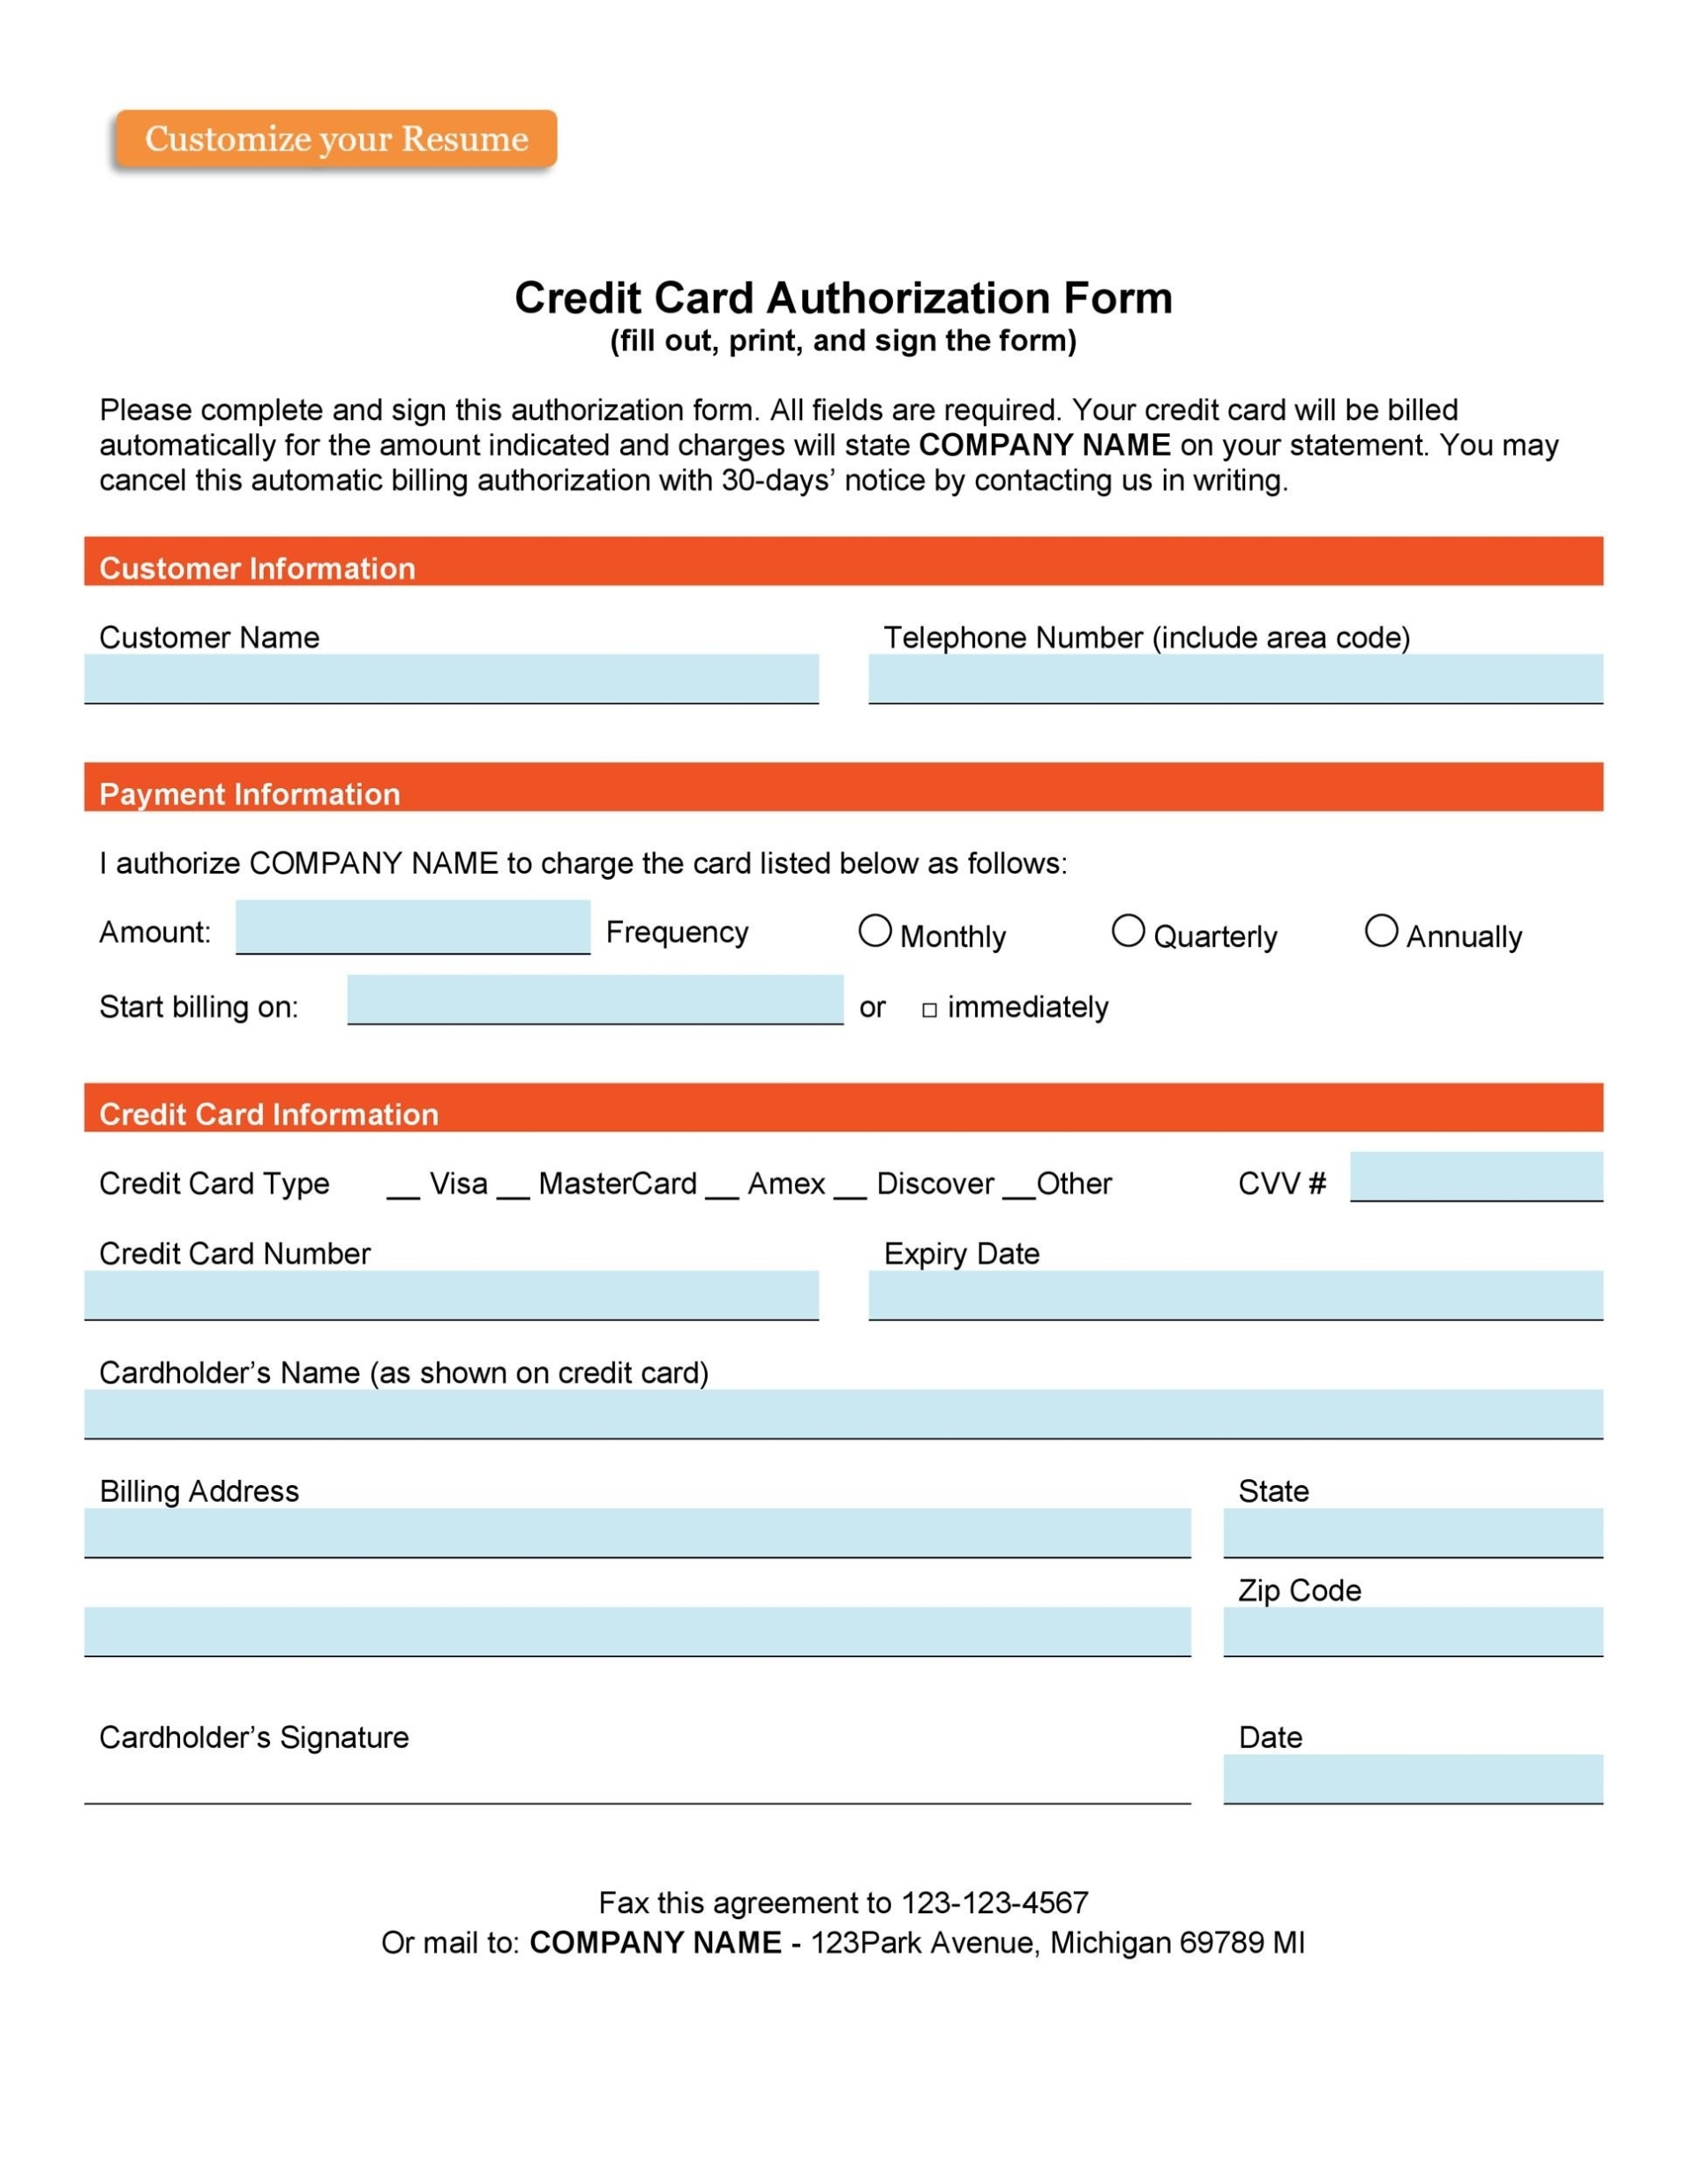 43 Credit Card Authorization Forms Templates {Ready To Use} Within Authorization To Charge Credit Card Template